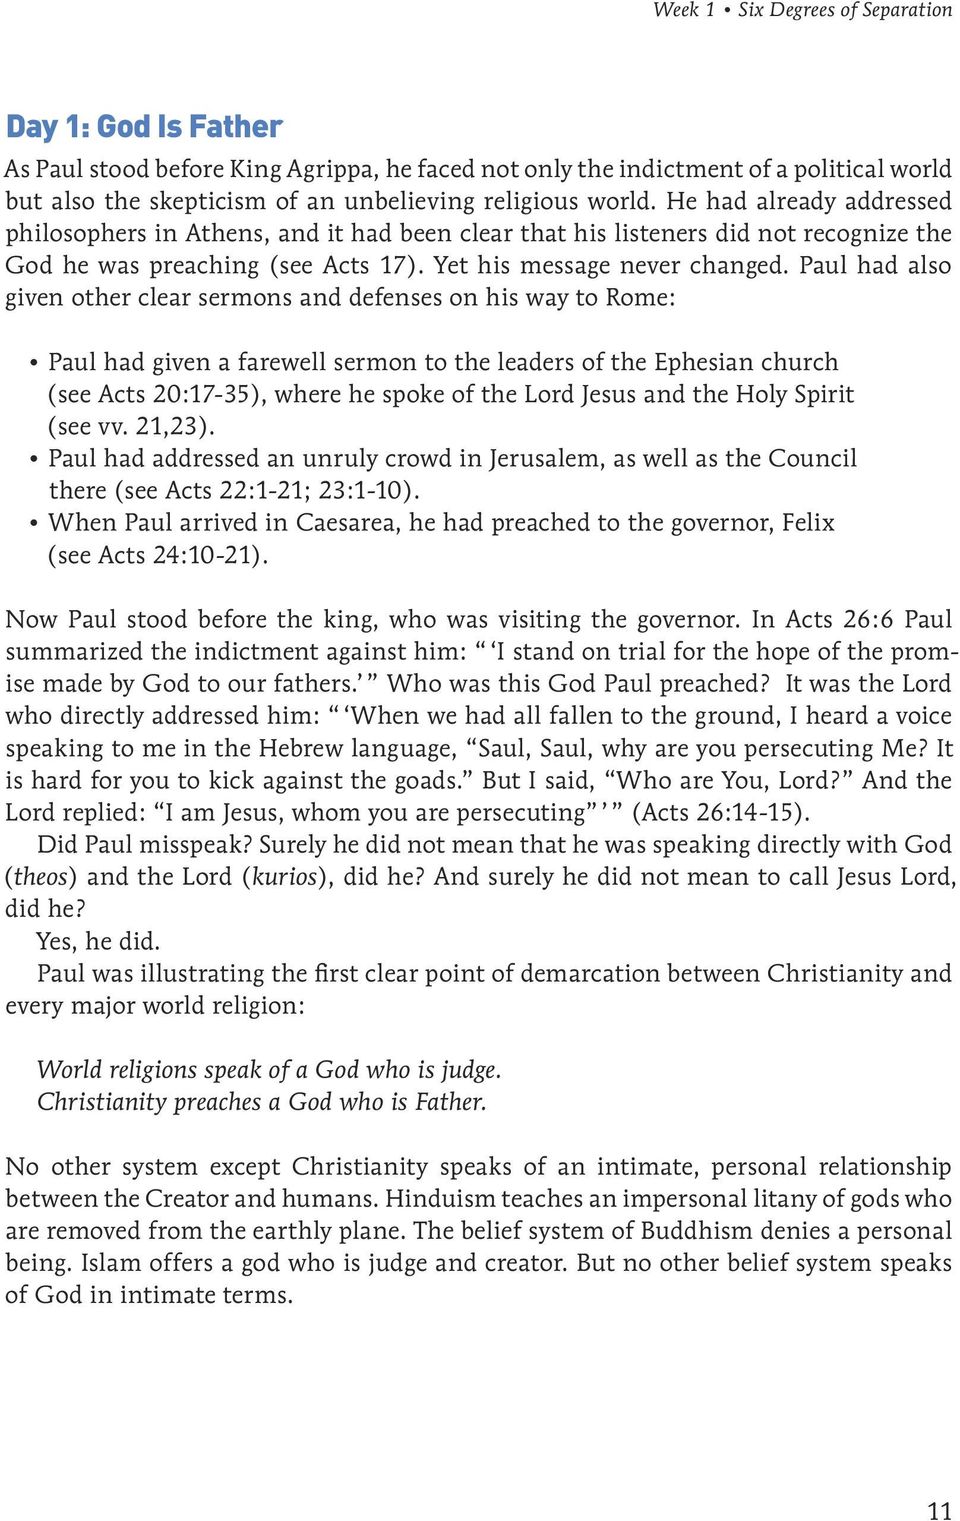 Paul had also given other clear sermons and defenses on his way to Rome: Paul had given a farewell sermon to the leaders of the Ephesian church (see Acts 20:17-35), where he spoke of the Lord Jesus